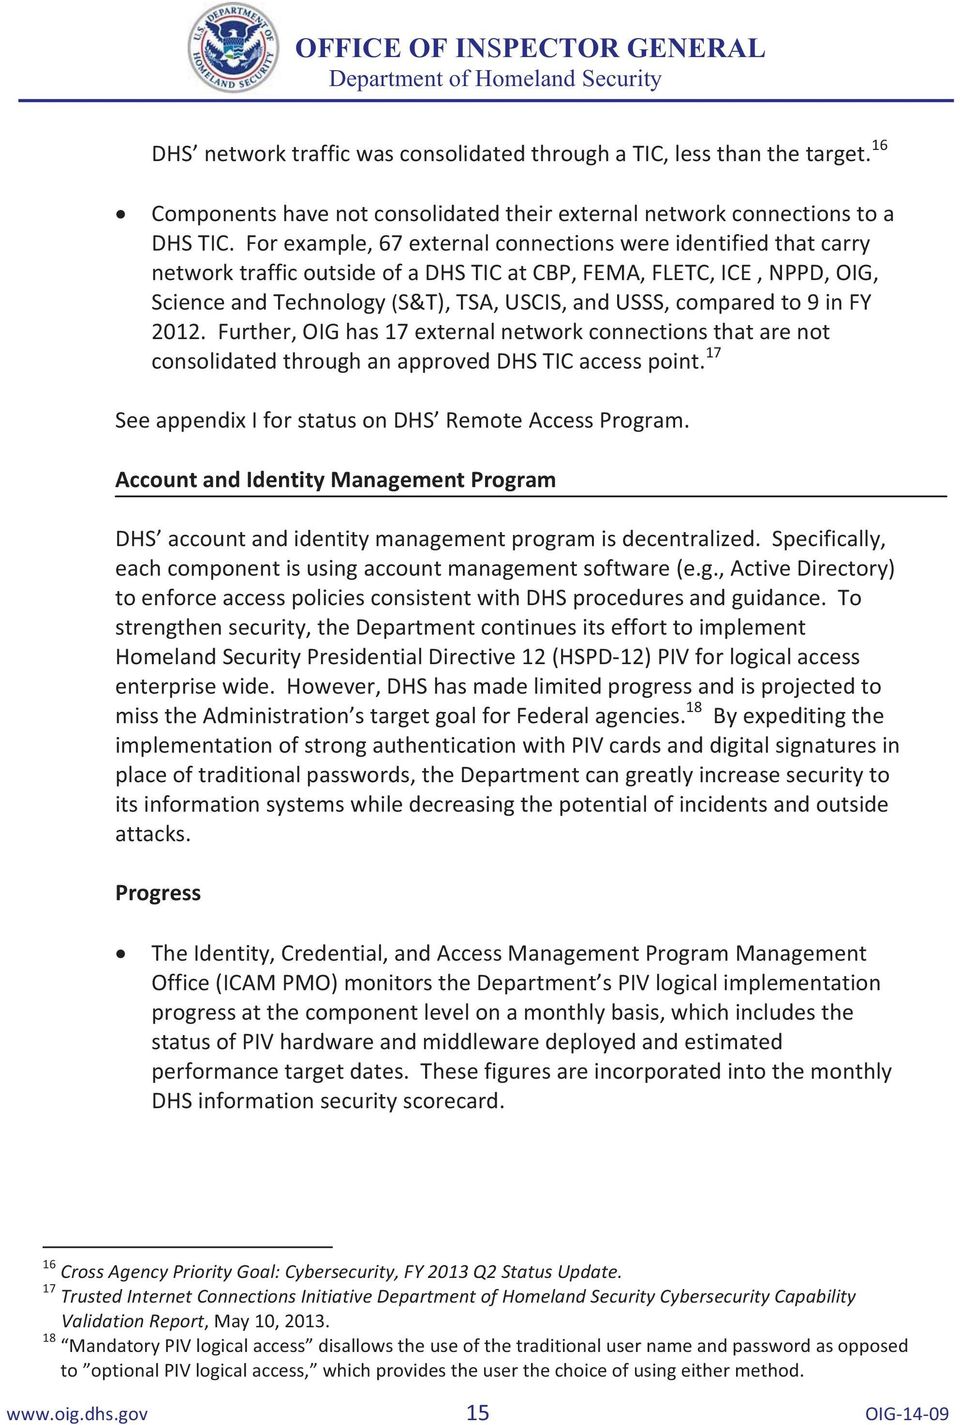 to 9 in FY 2012. Further, OIG has 17 external network connections that are not consolidated through an approved DHS TIC access point. 17 See appendix I for status on DHS Remote Access Program.